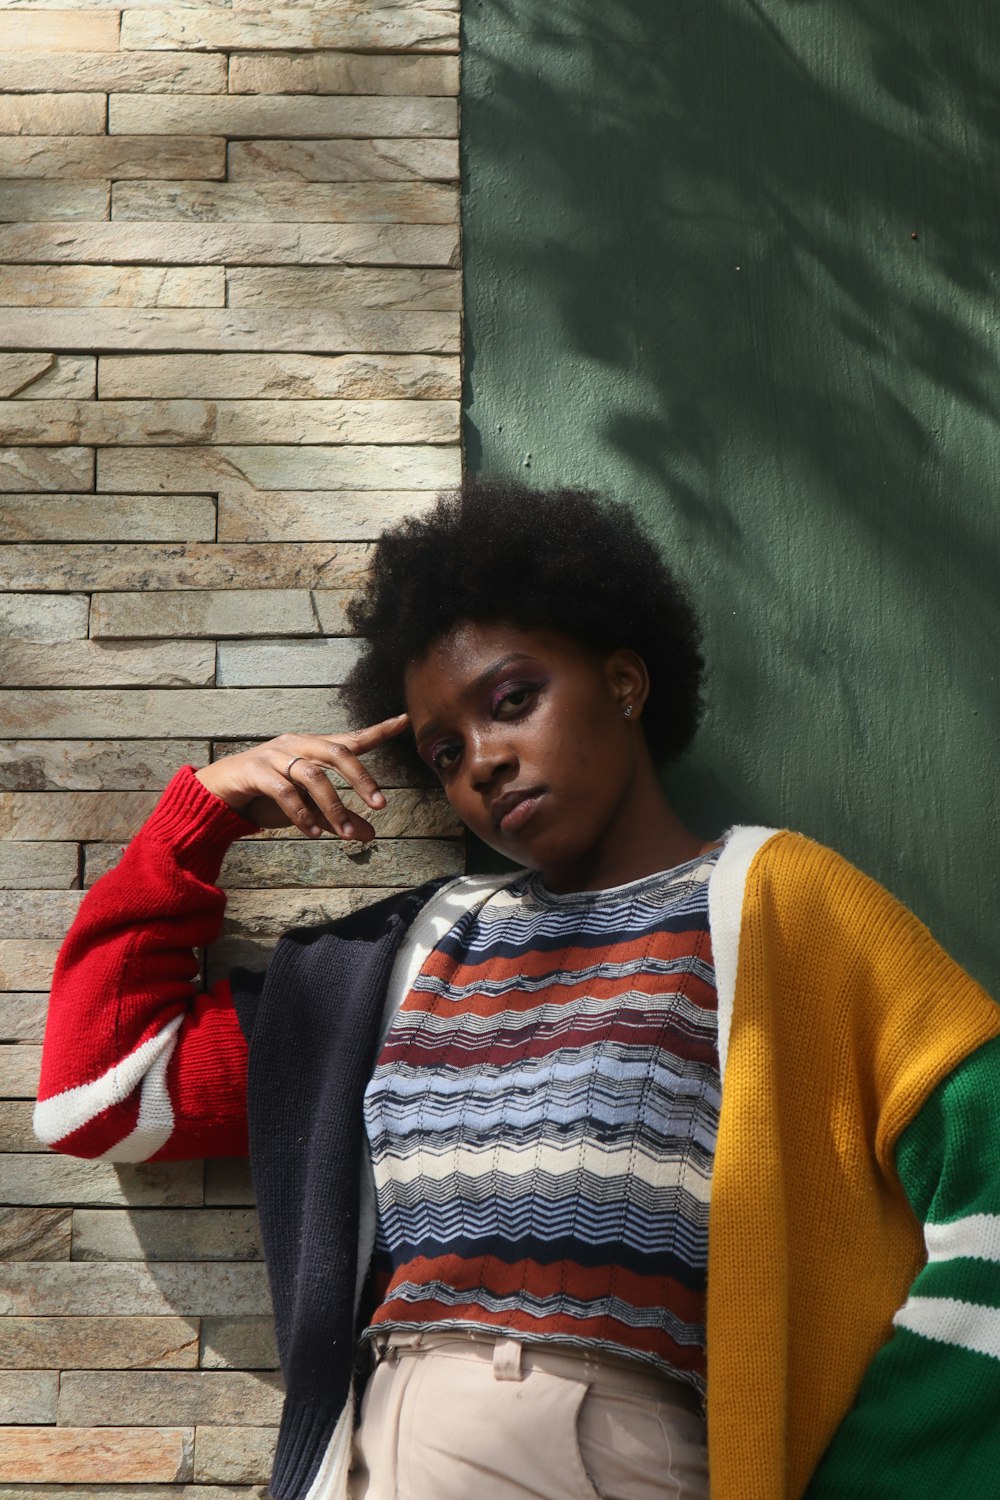 a woman leaning against a brick wall wearing a colorful sweater